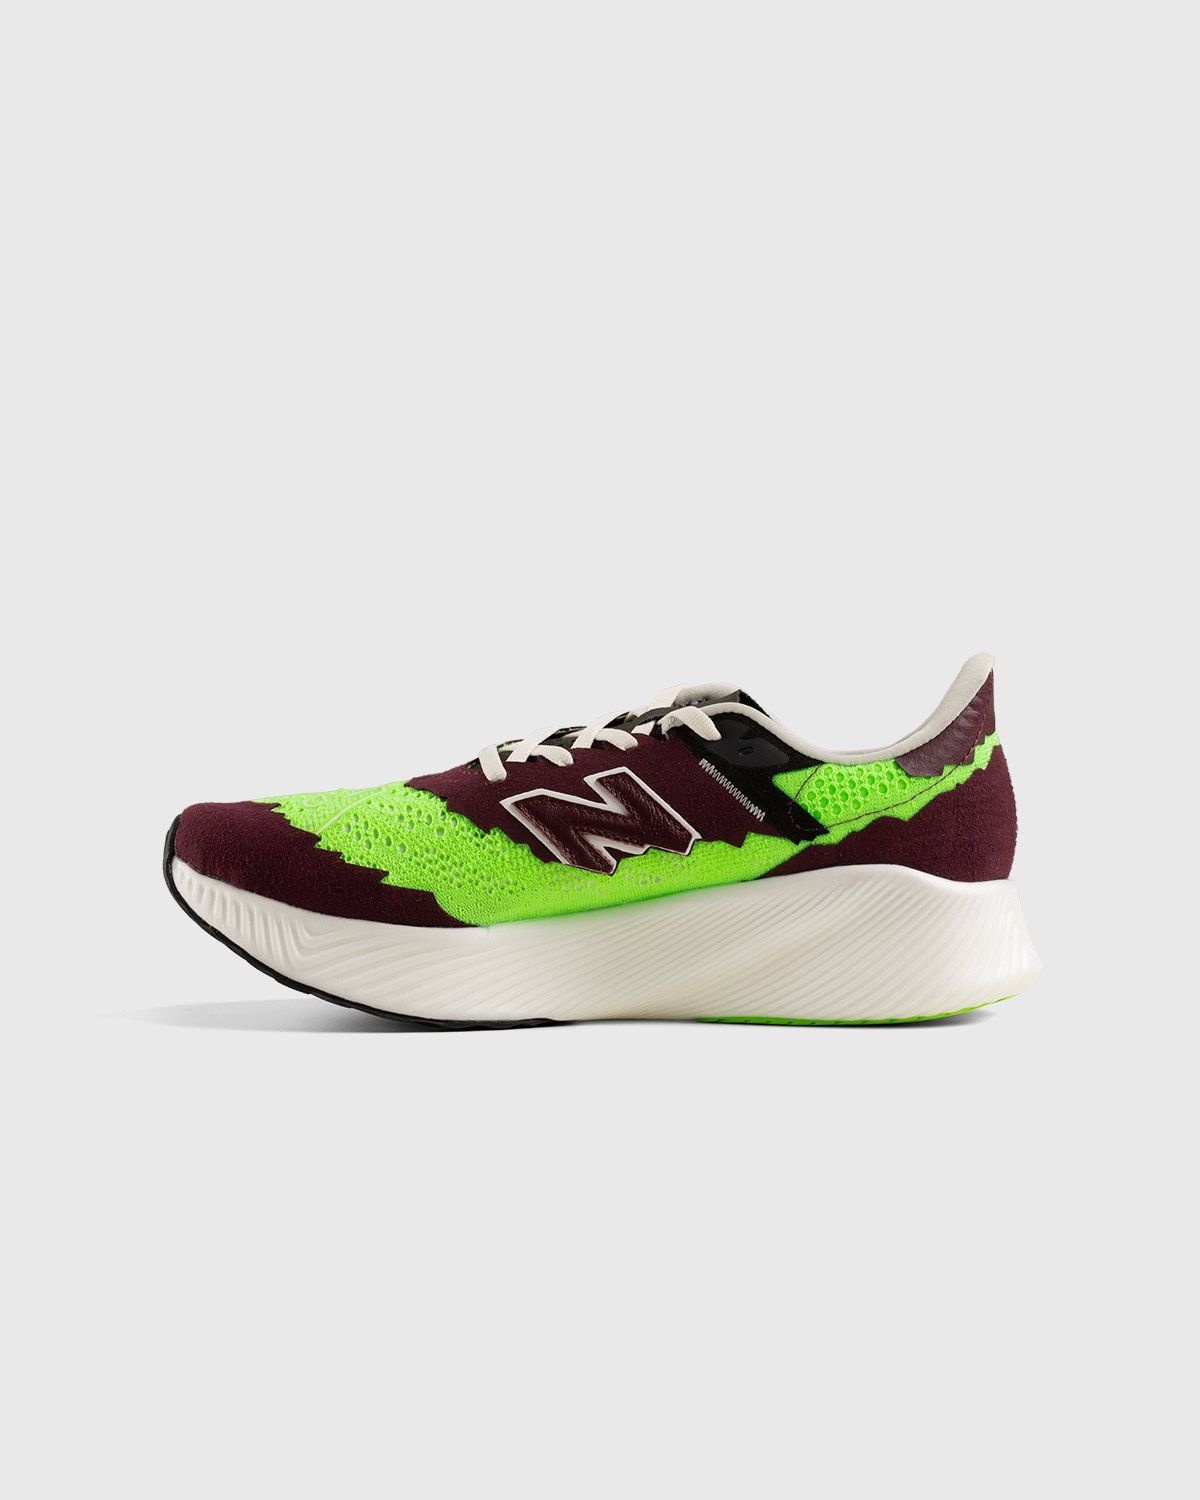 New Balance x Stone Island – FuelCell RC Elite v2 Energy Lime - Sneakers - Green - Image 2